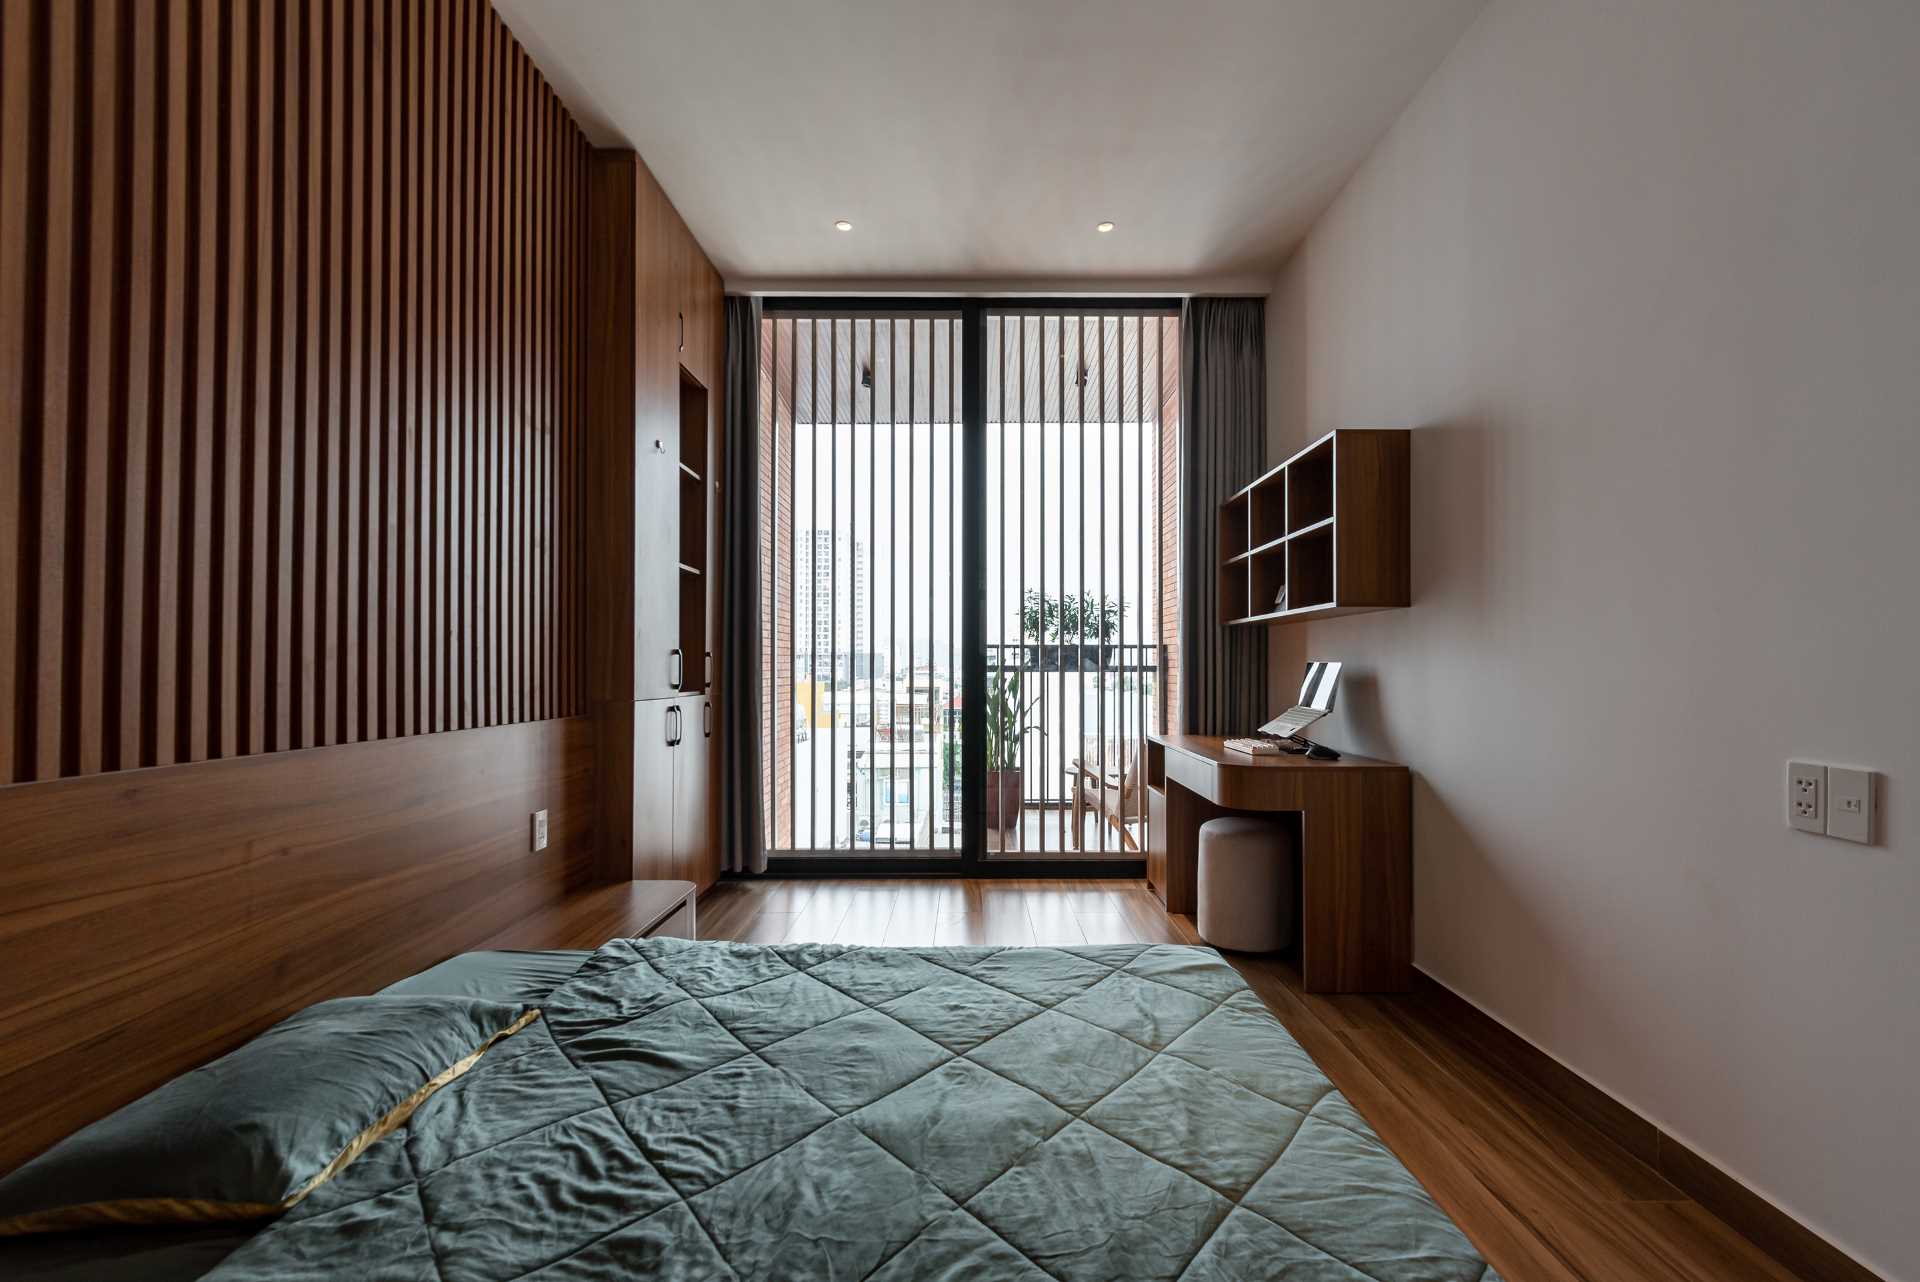 A modern bedroom with a glass-enclosed bathroom and a balcony.